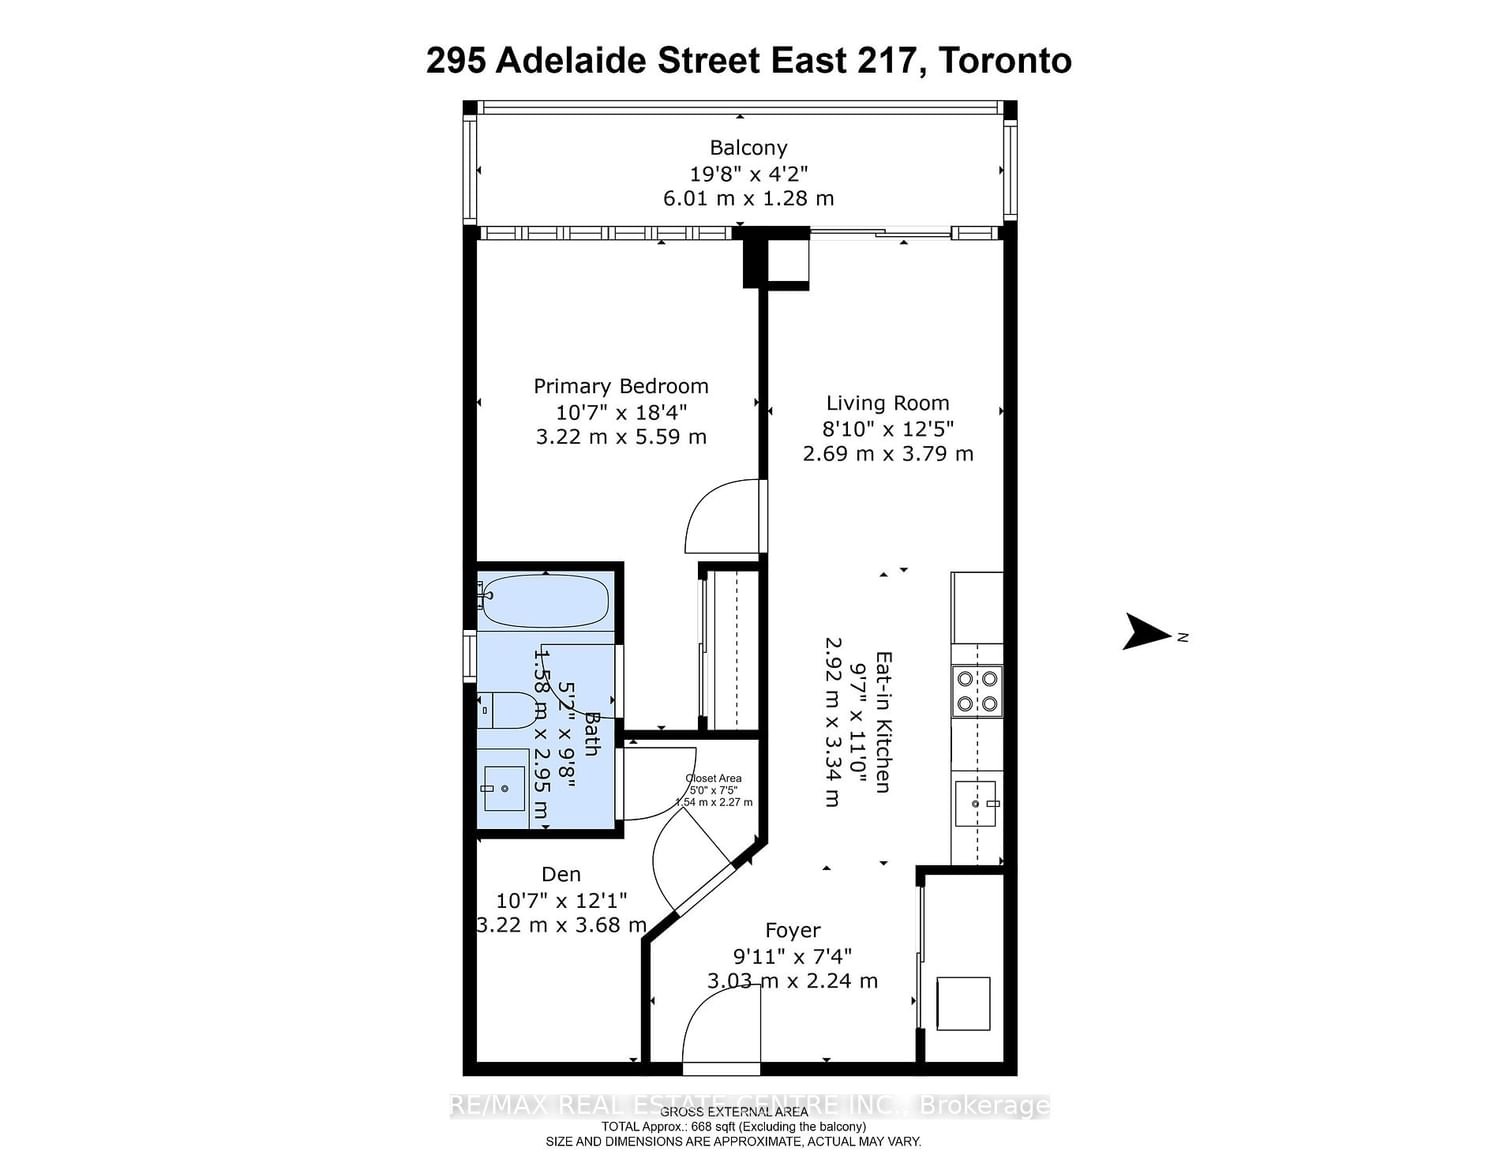 295 Adelaide St W, unit 217 for sale - image #5